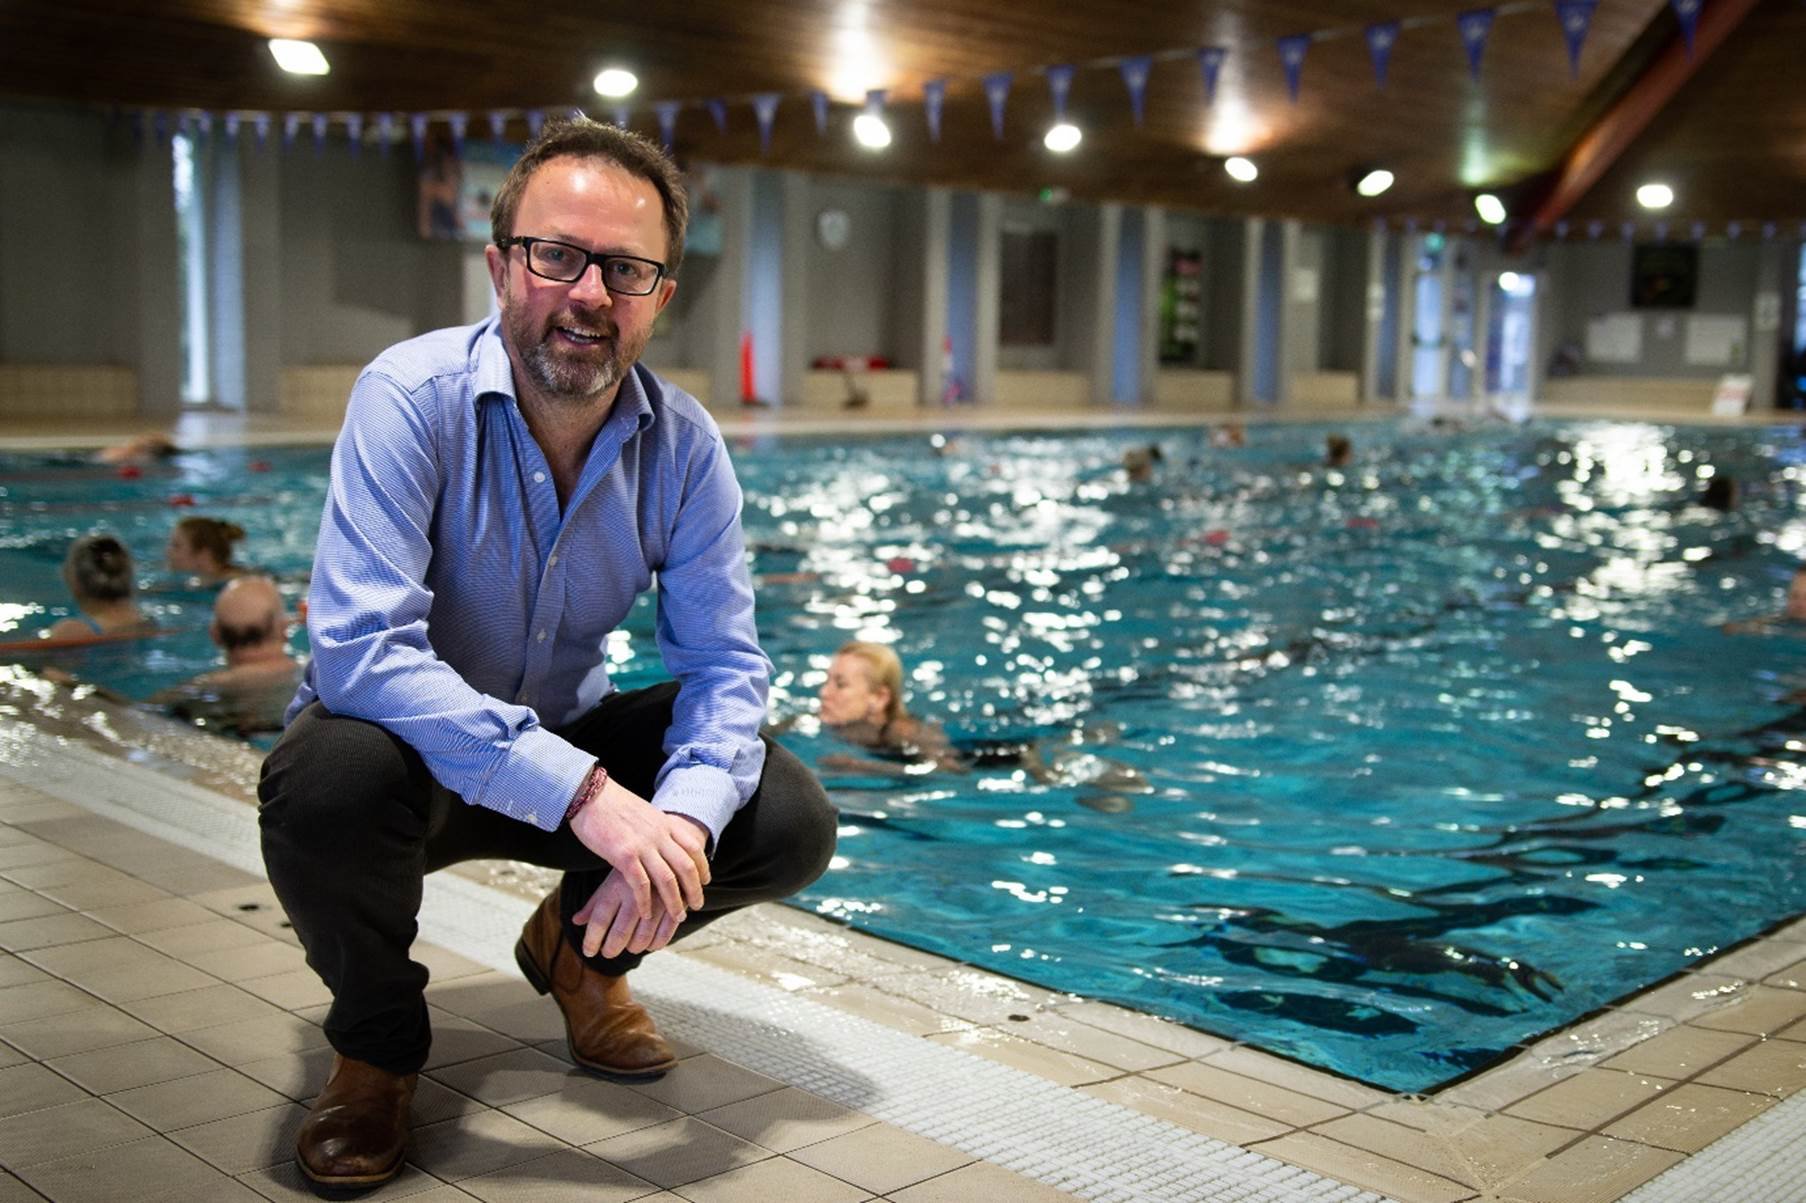 UK data center startup offers to heat Britain's swimming pools